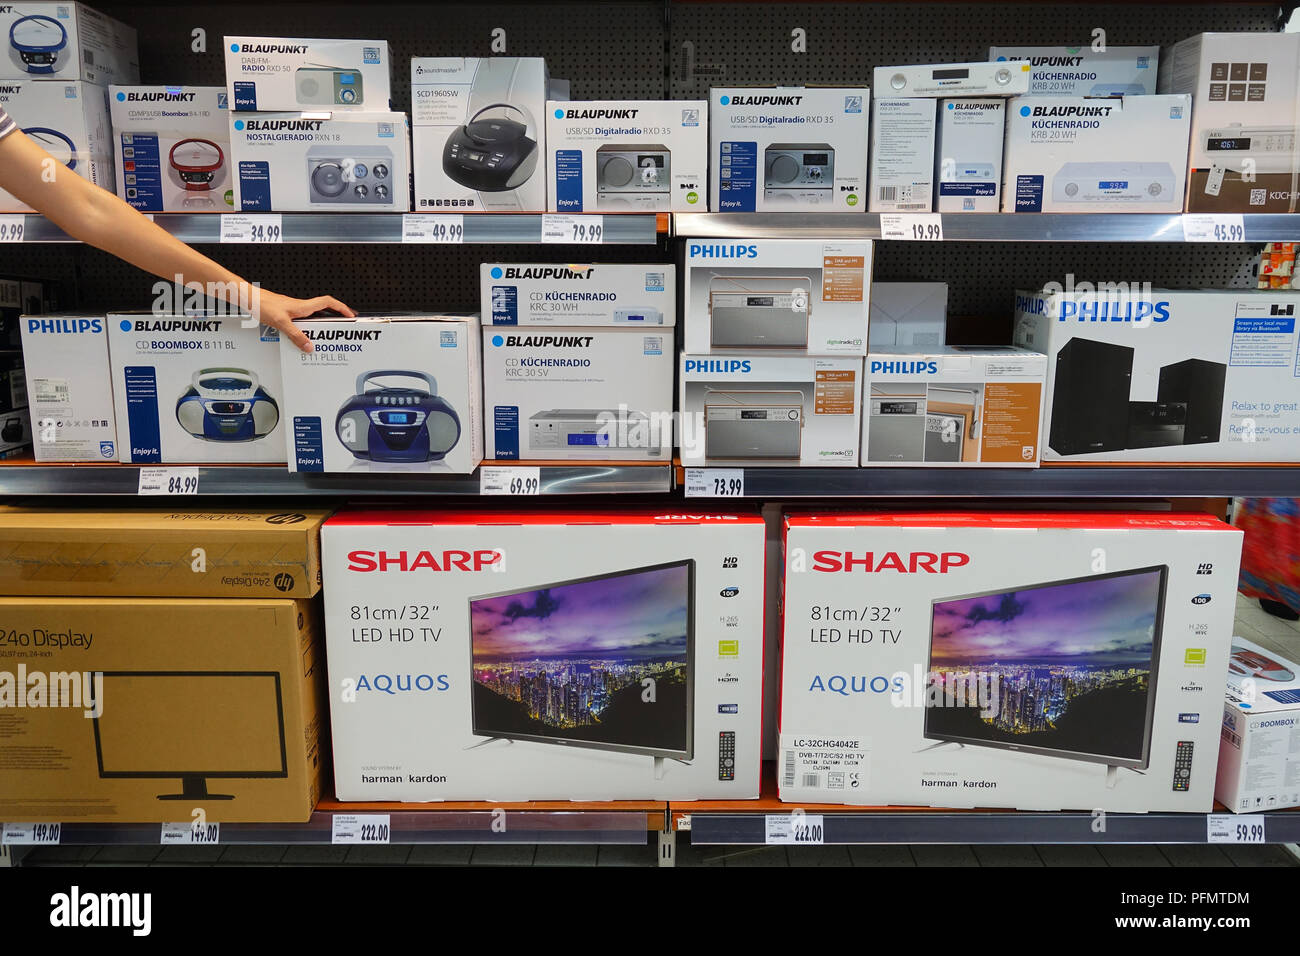 Electrical devices in a Kaufland supermarket Stock Photo